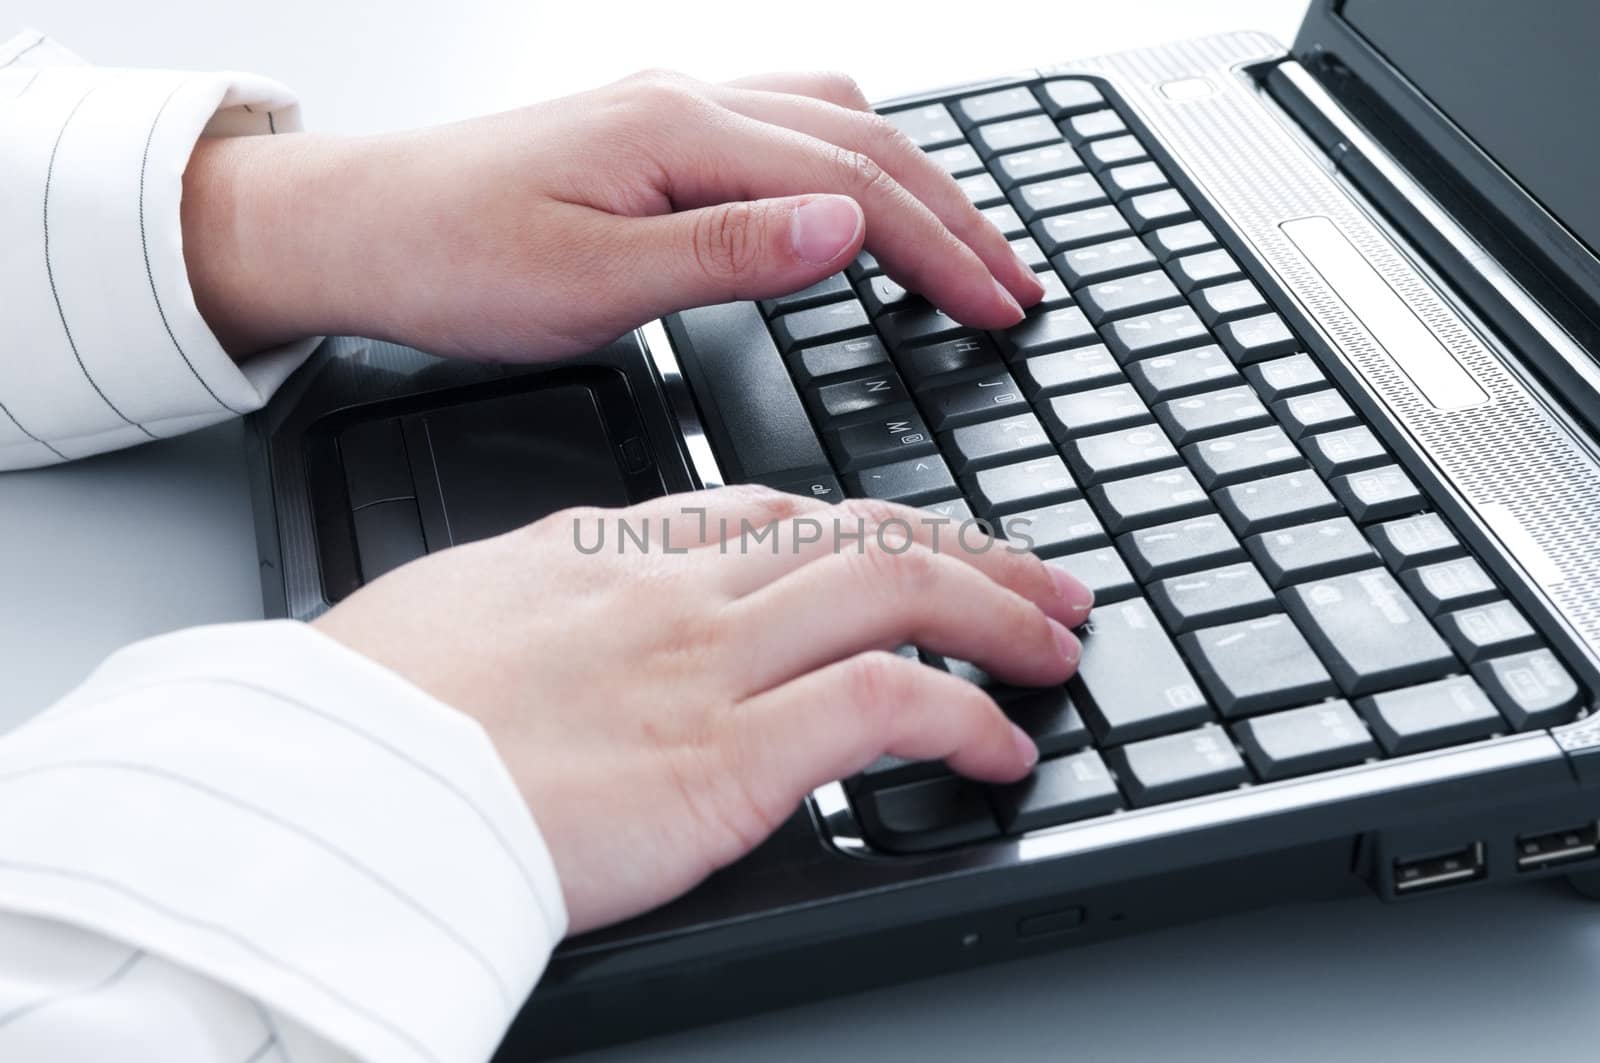 Closeup of hands typing on keyboard.